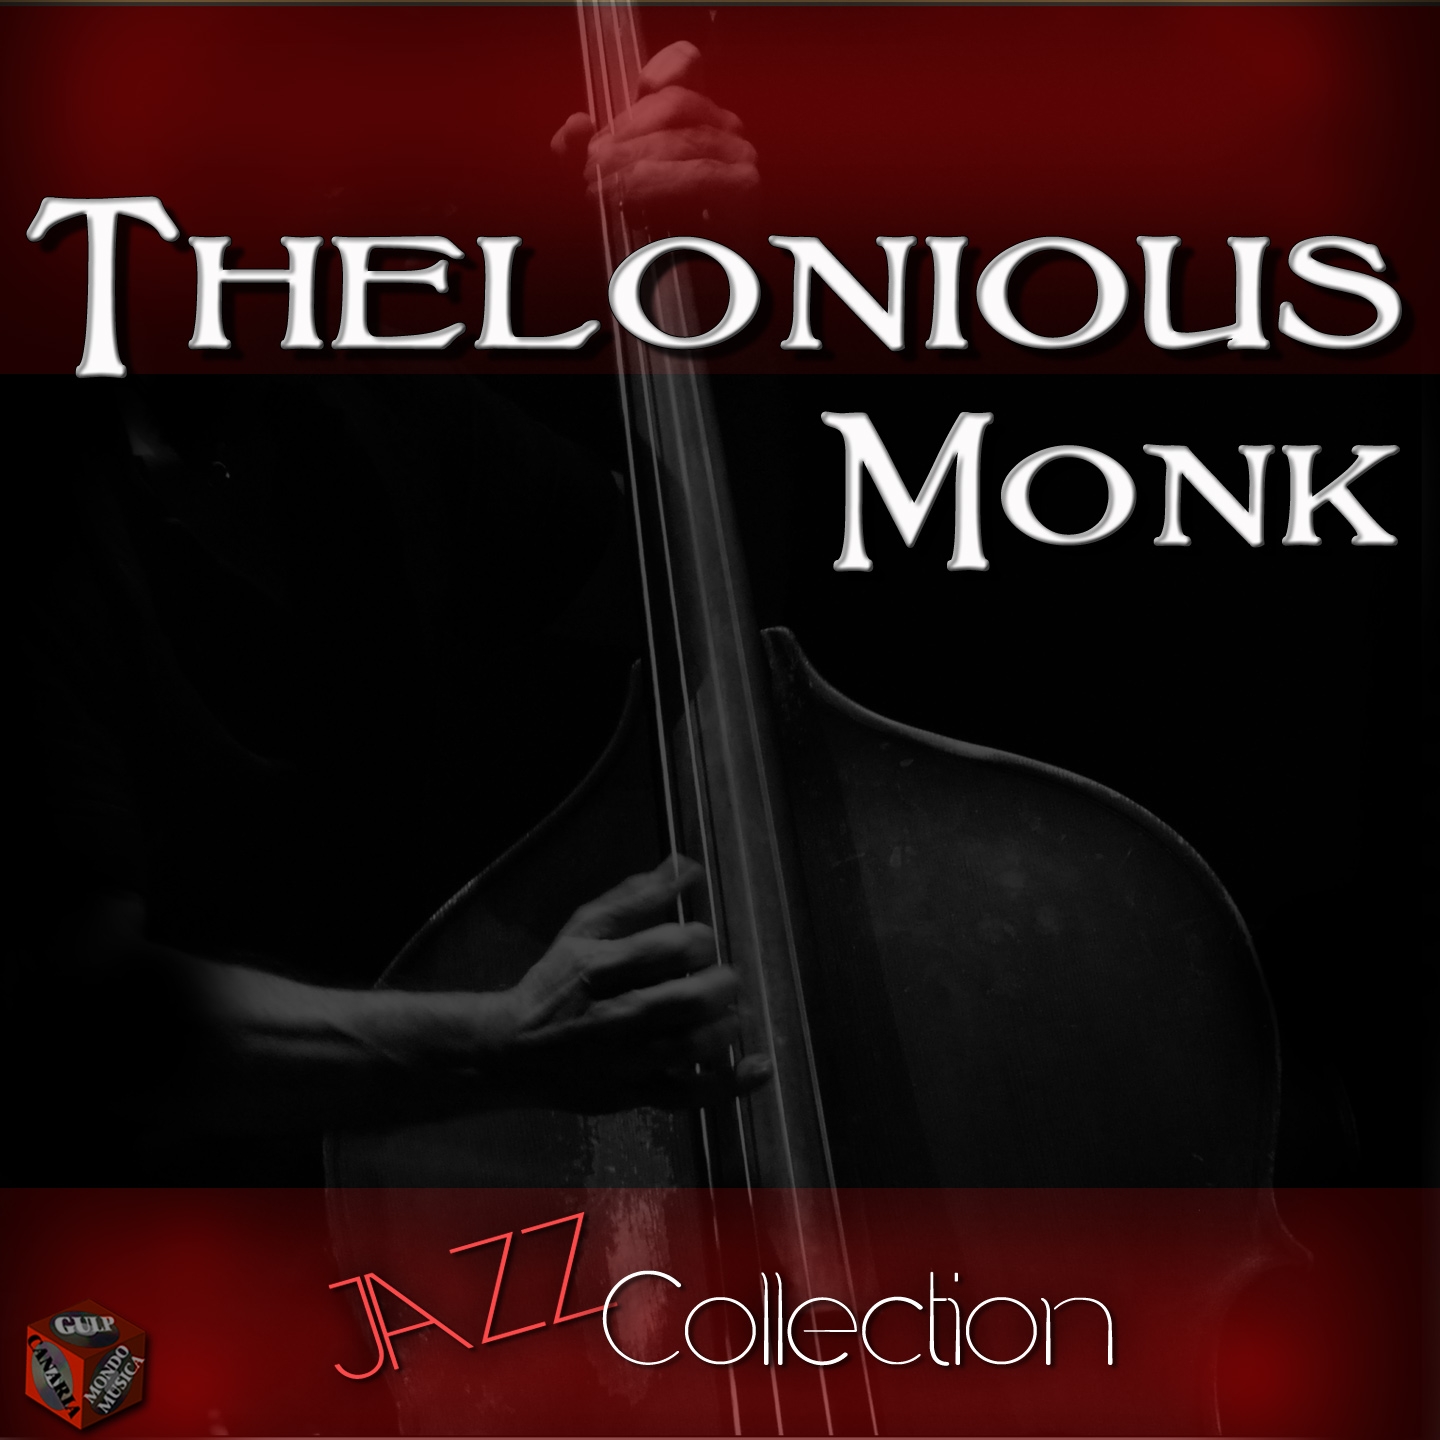 Jazz Collection: Thelonious Monk